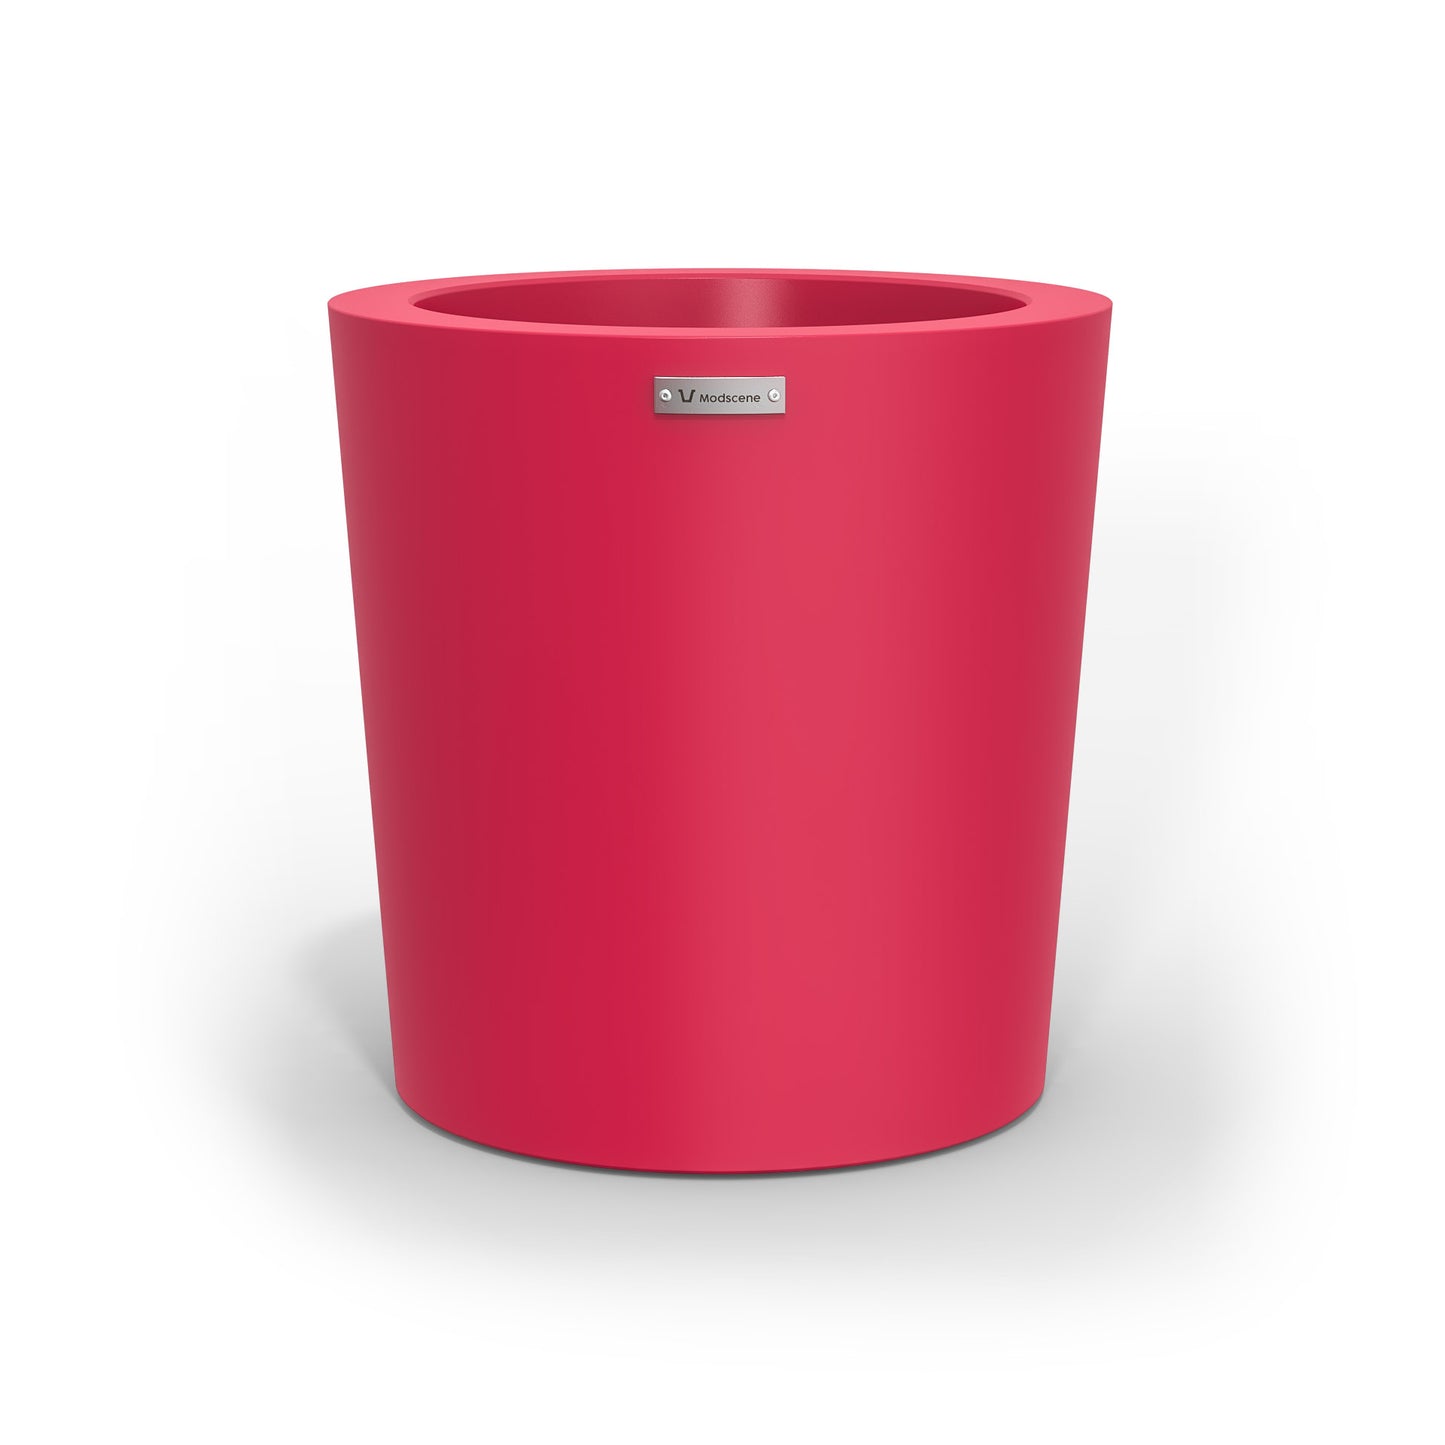 A modern style planter pot in pink. Made by Modscene NZ.